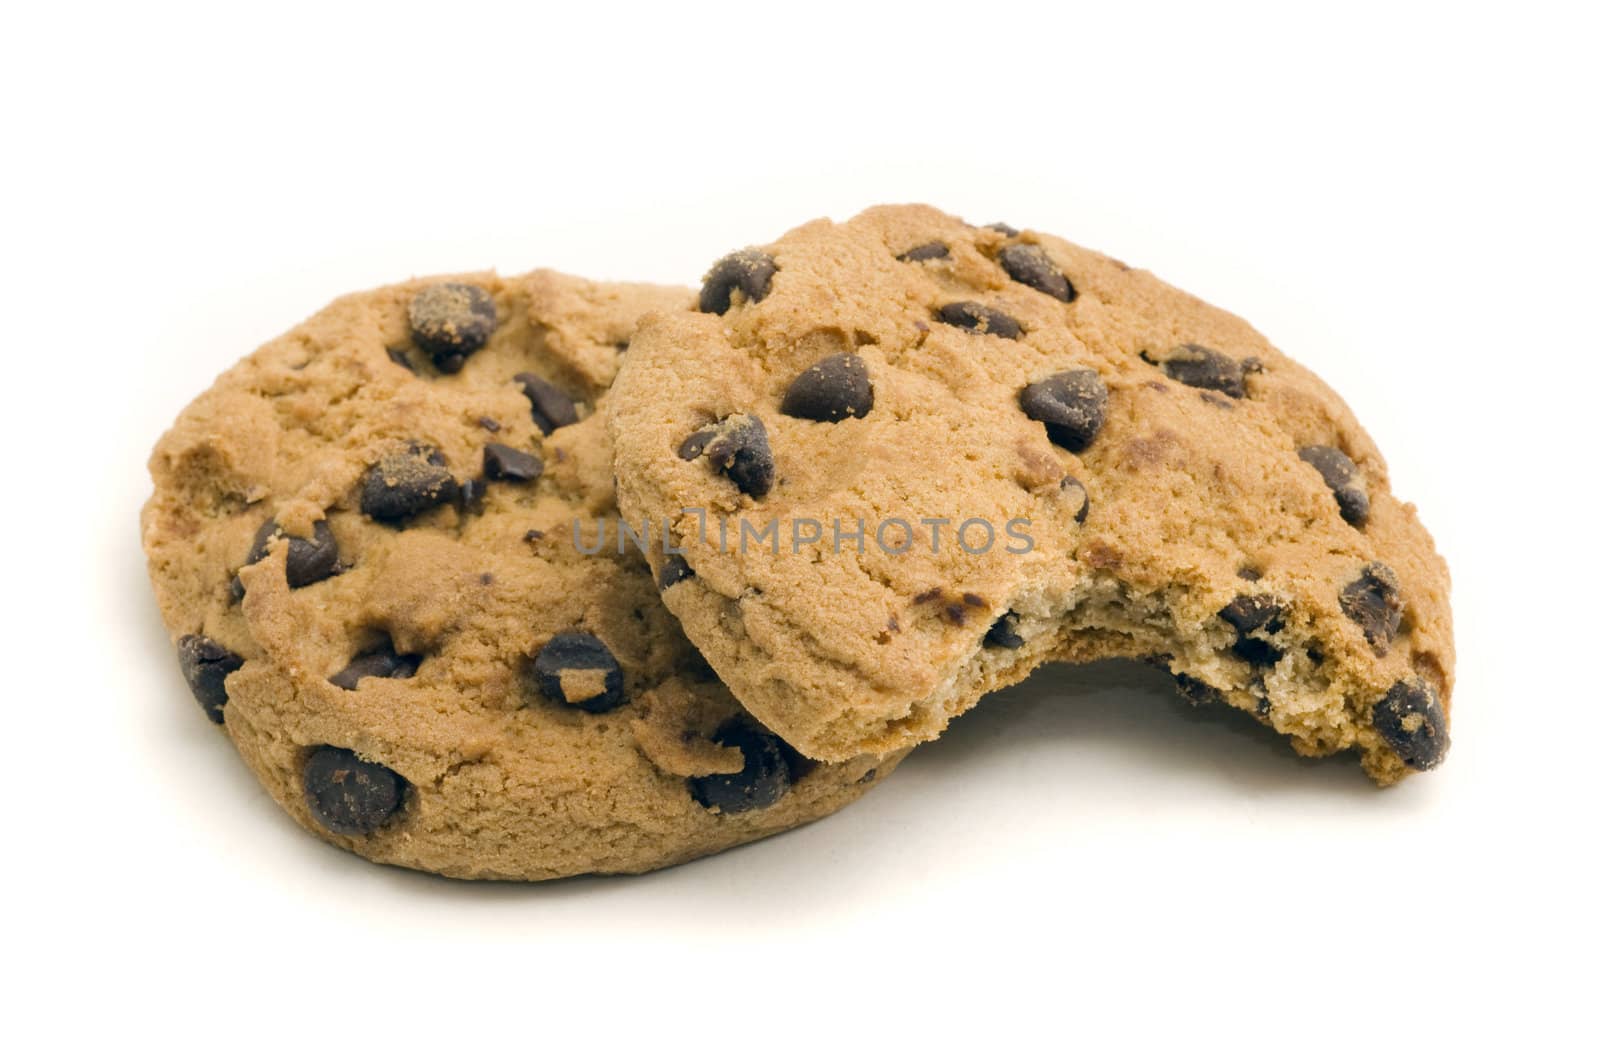 Two chocolate chip cookies with on with a bite out of it, on white background